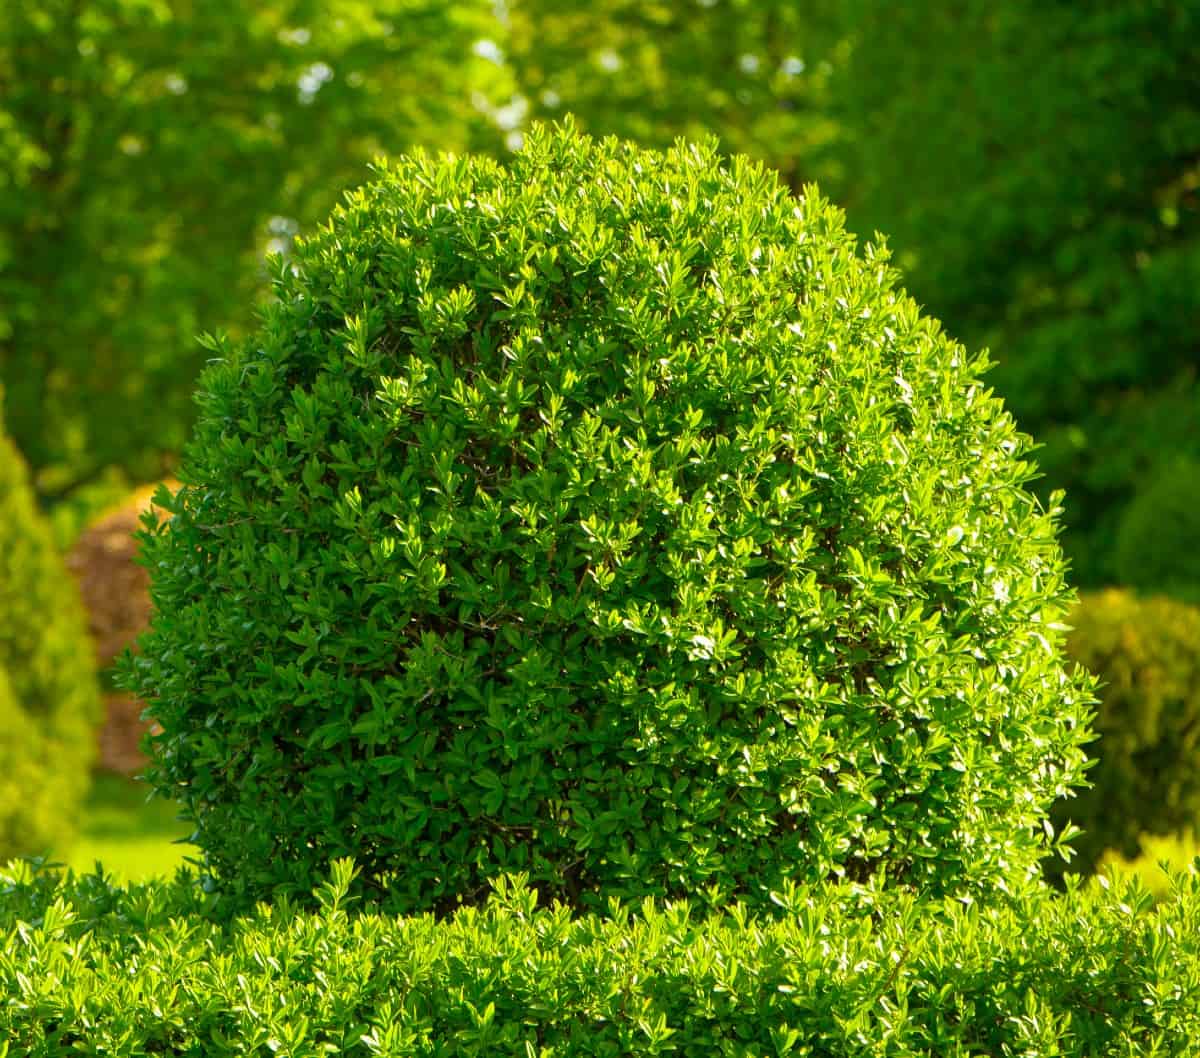 The boxwood is a dwarf evergreen shrub that is easy to care for.